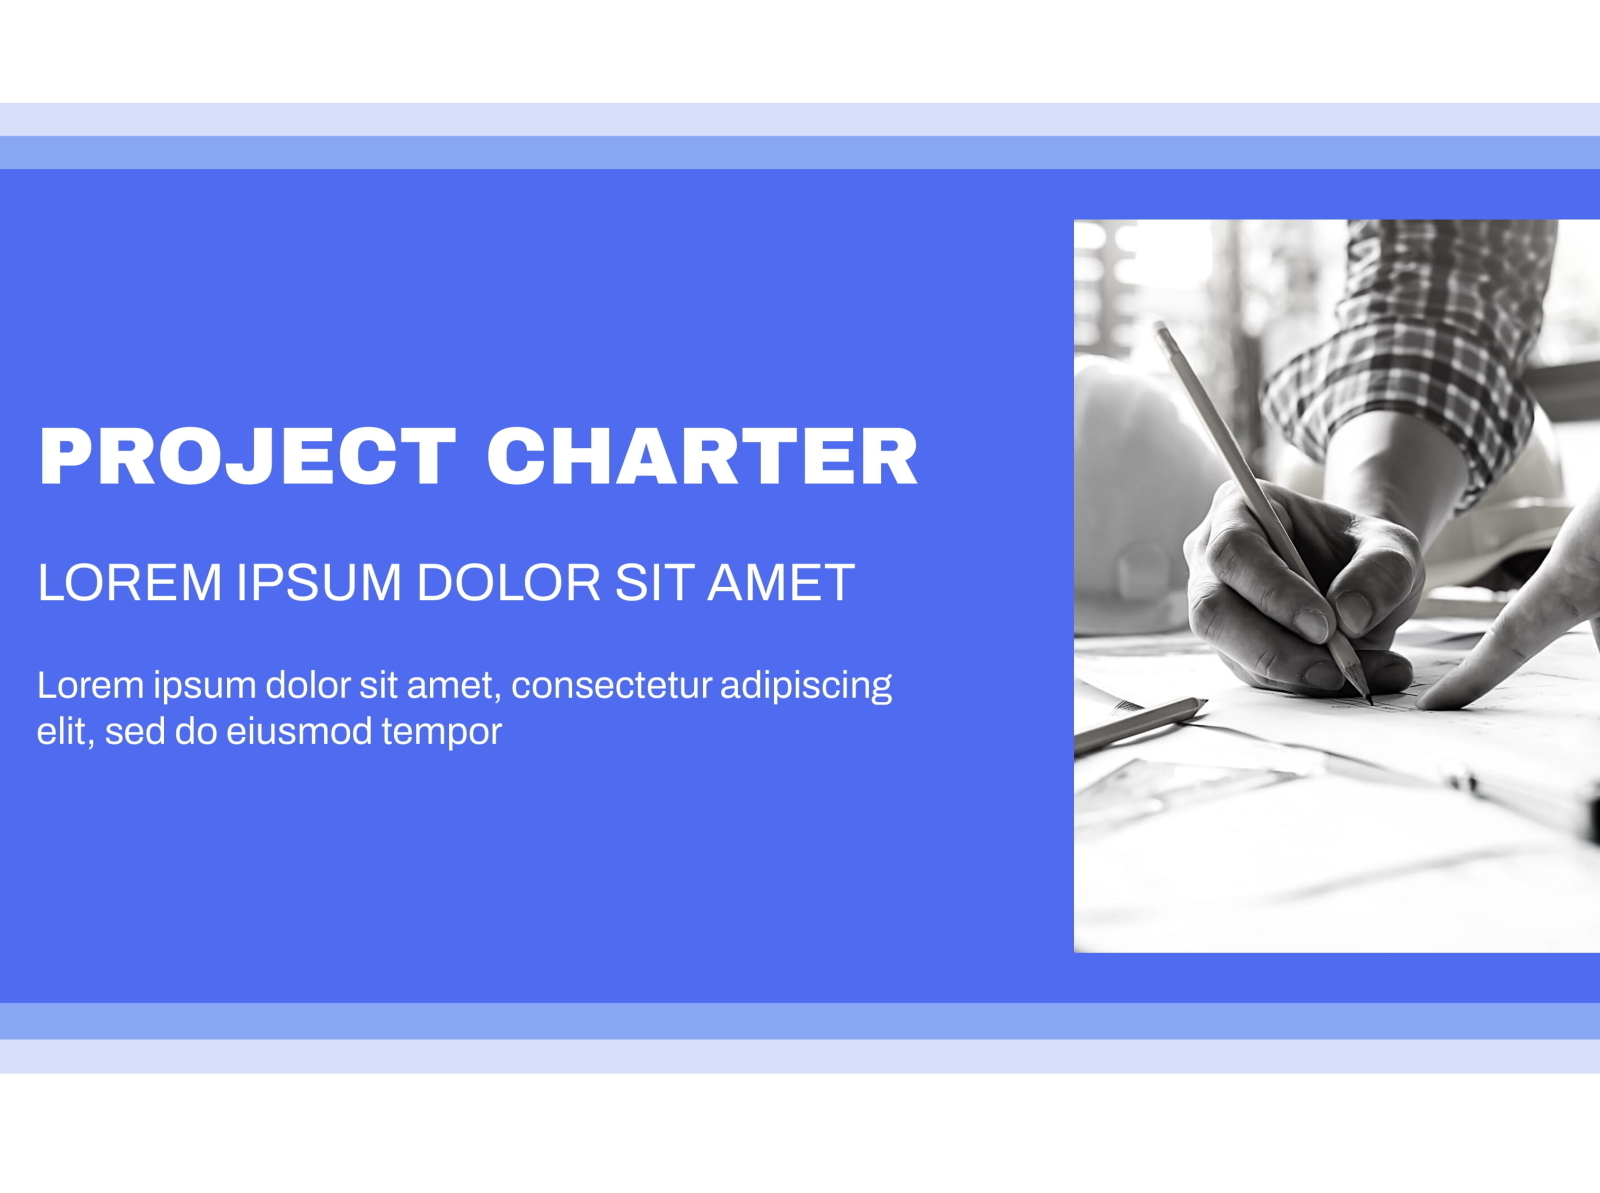 Project Charter Template by FREE Google Docs & Google Slide templates